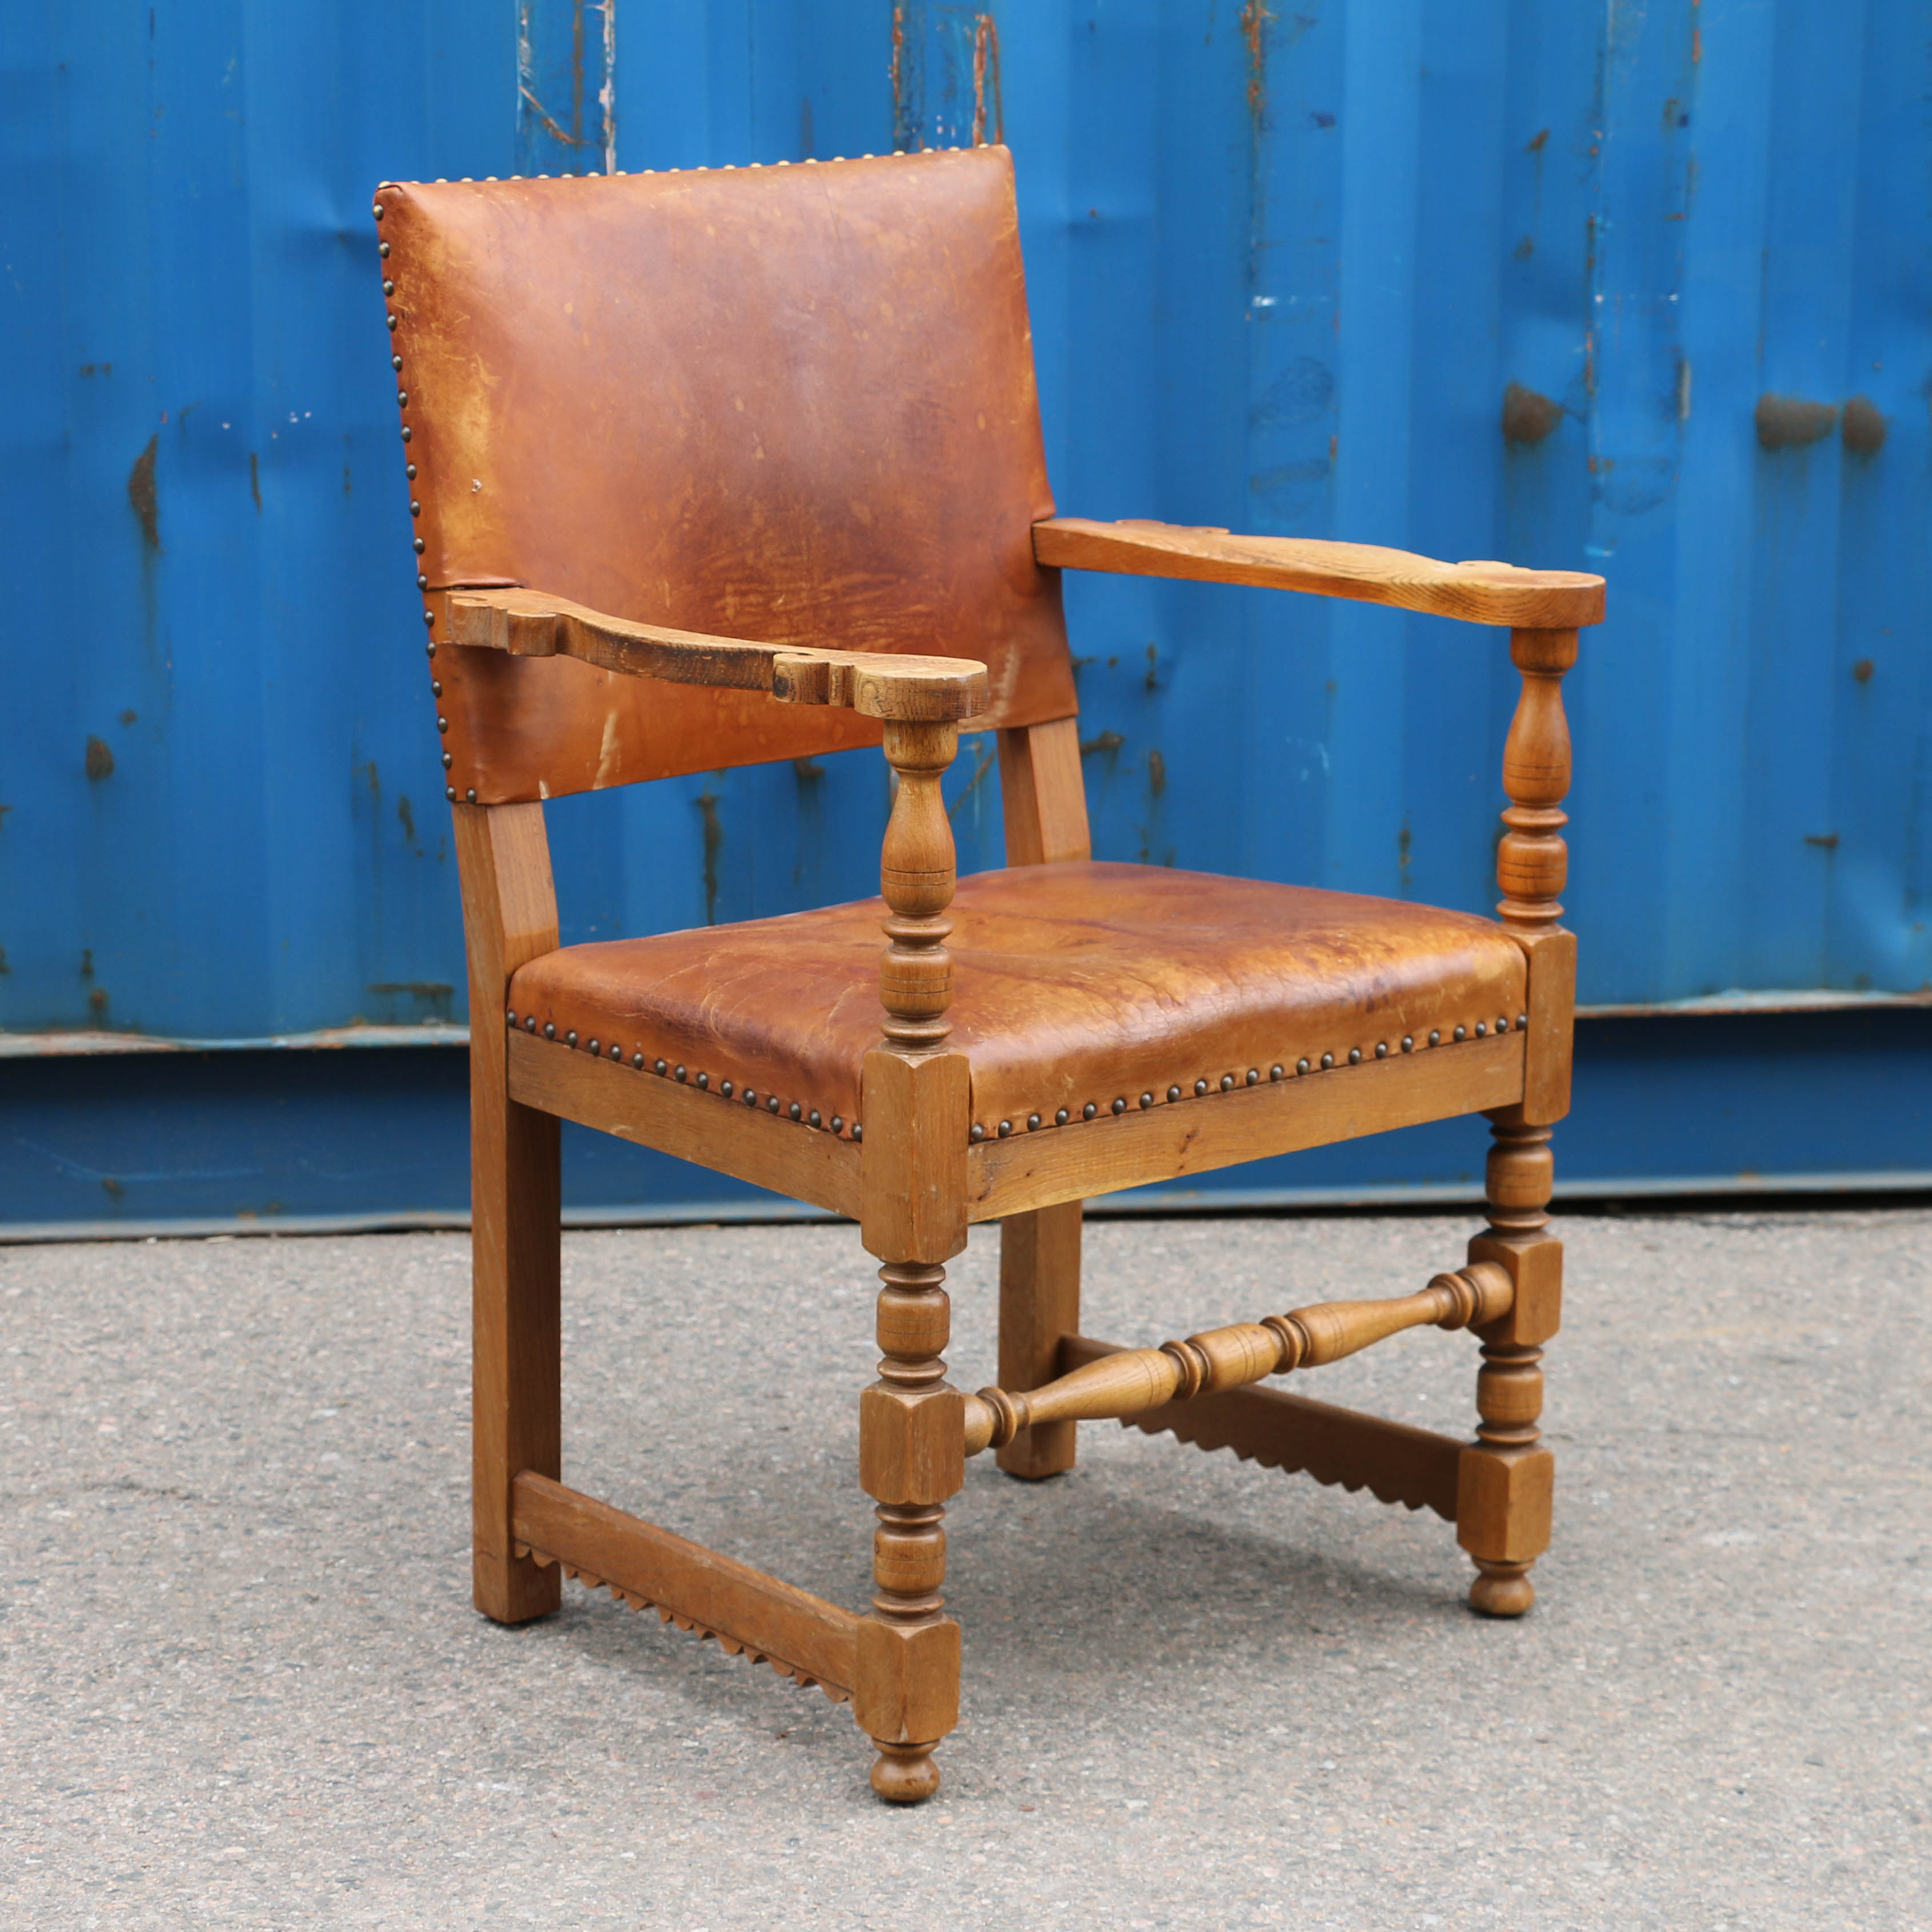 About Overview Custom Work Project, Antique Oak Chair With Leather Seat